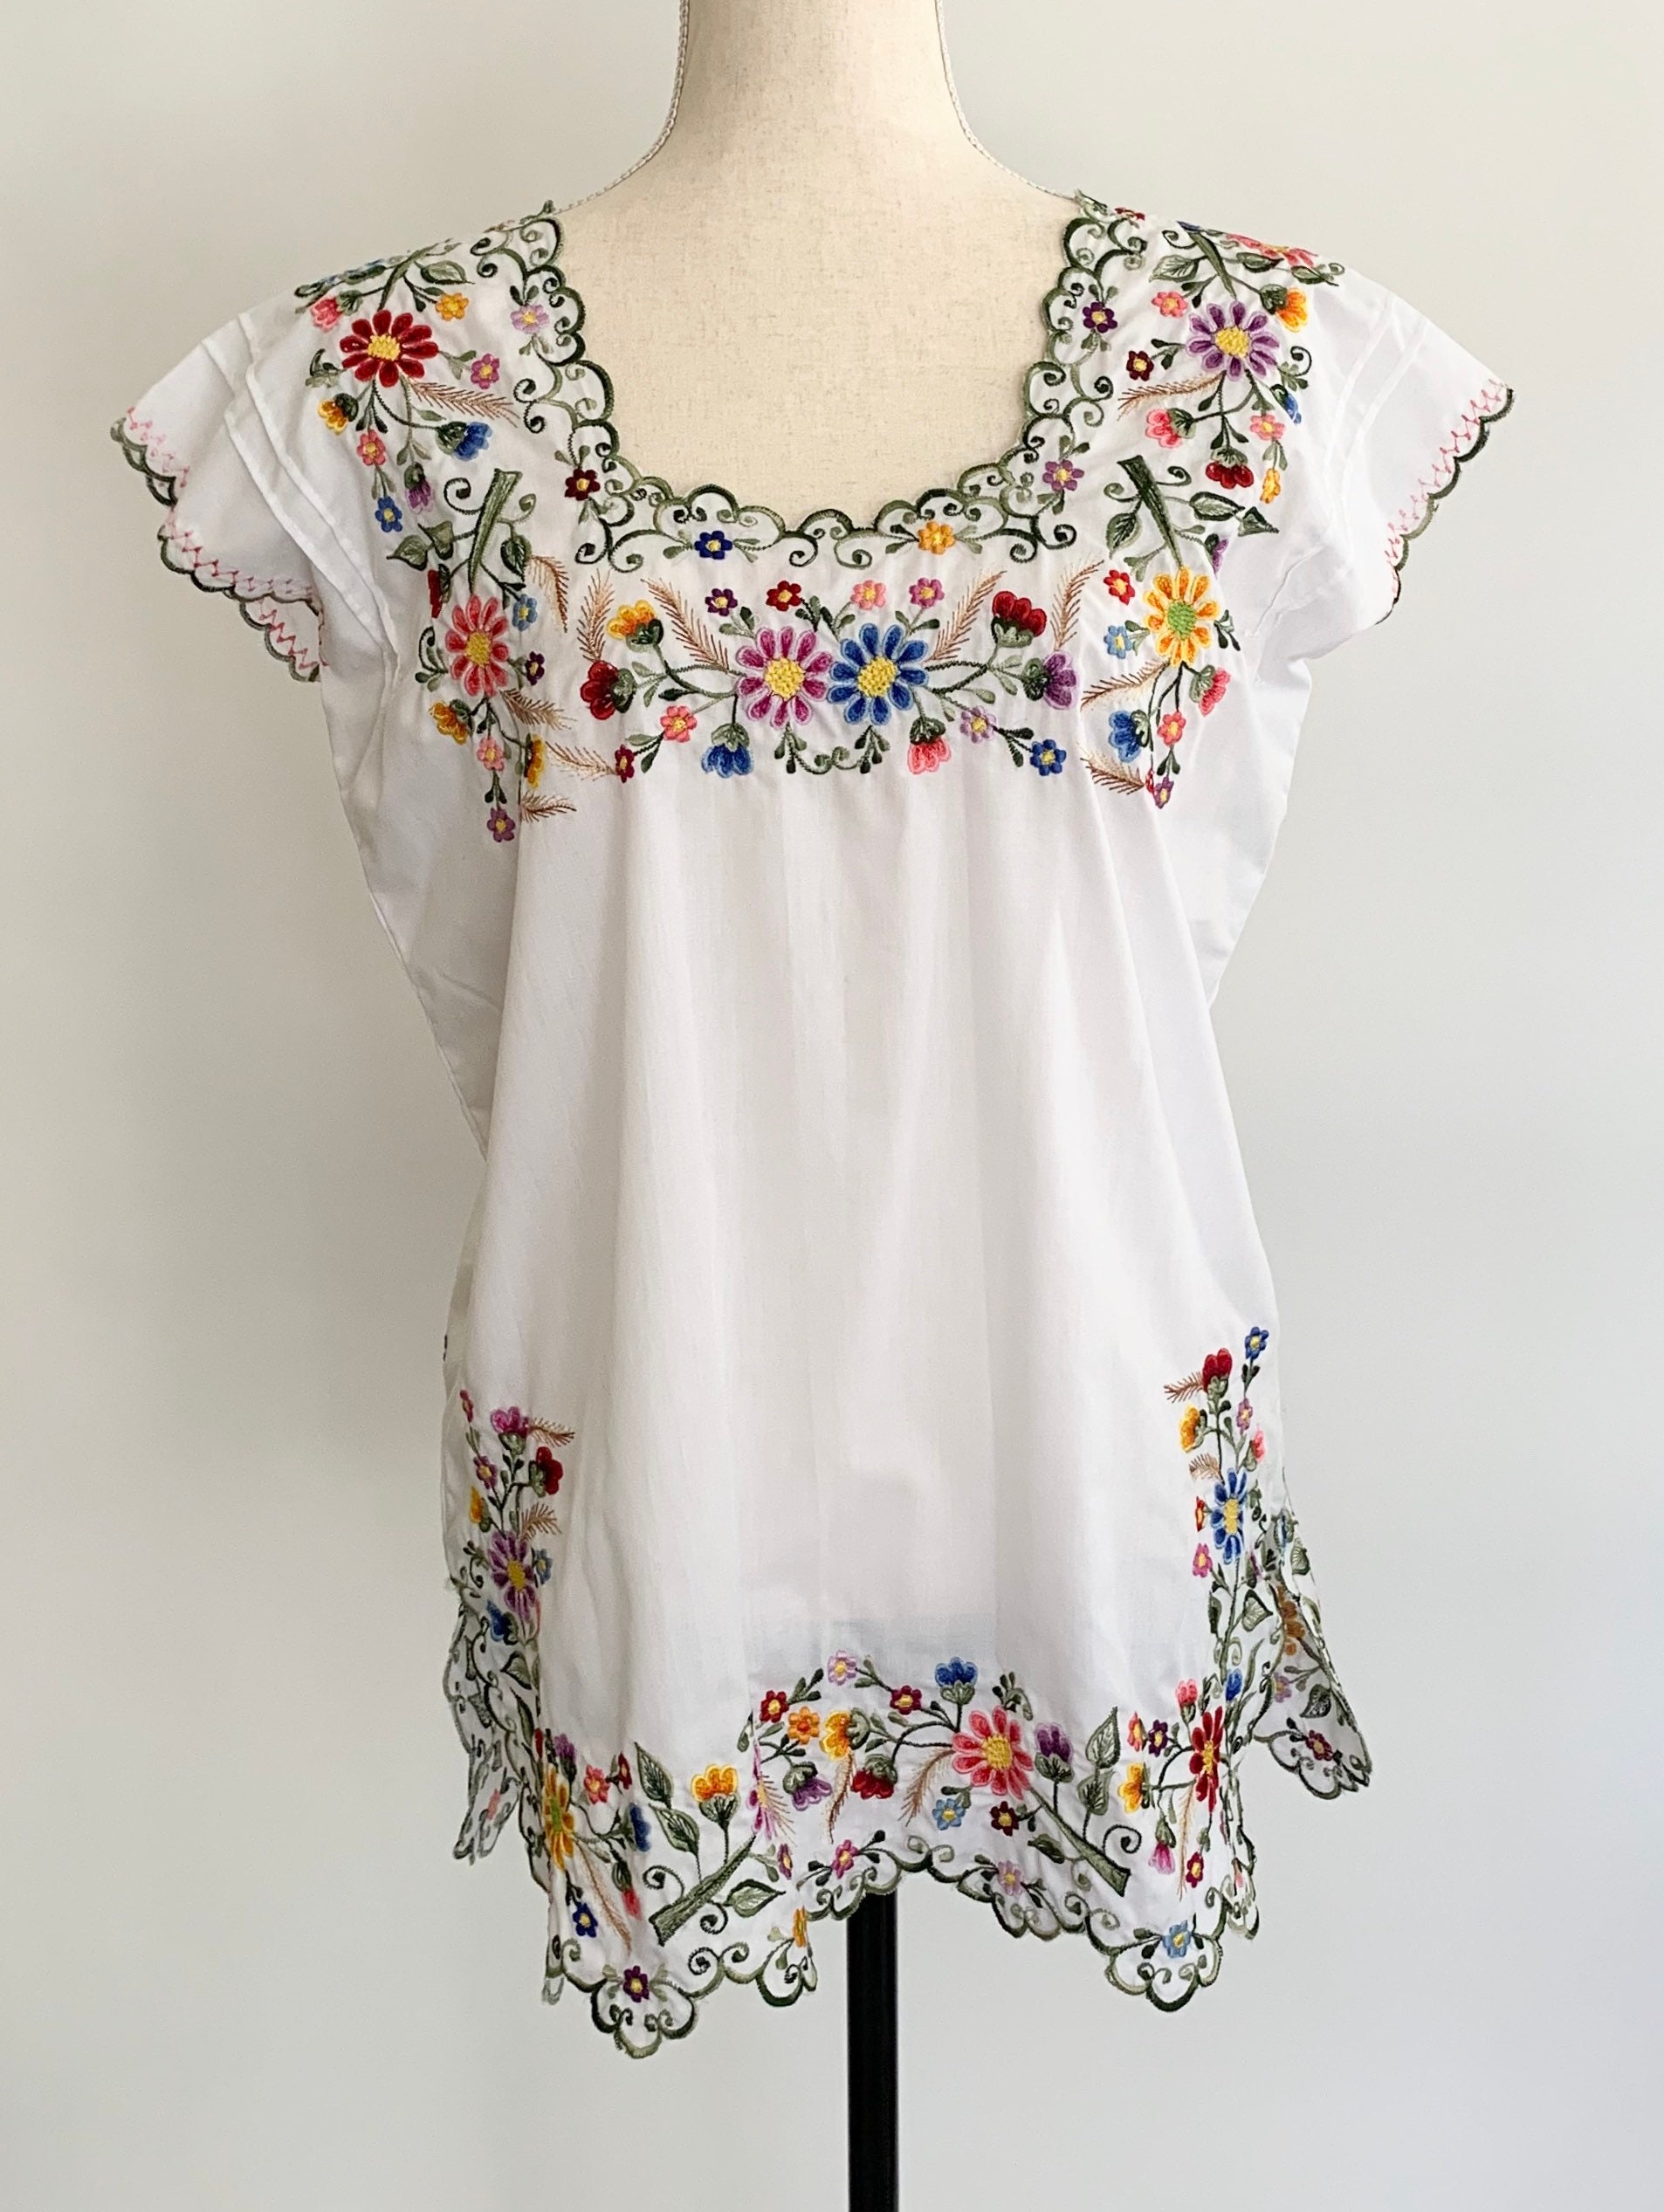 Embroidered Mexican Tunic Top Vintage White Cotton Blend Floral ...